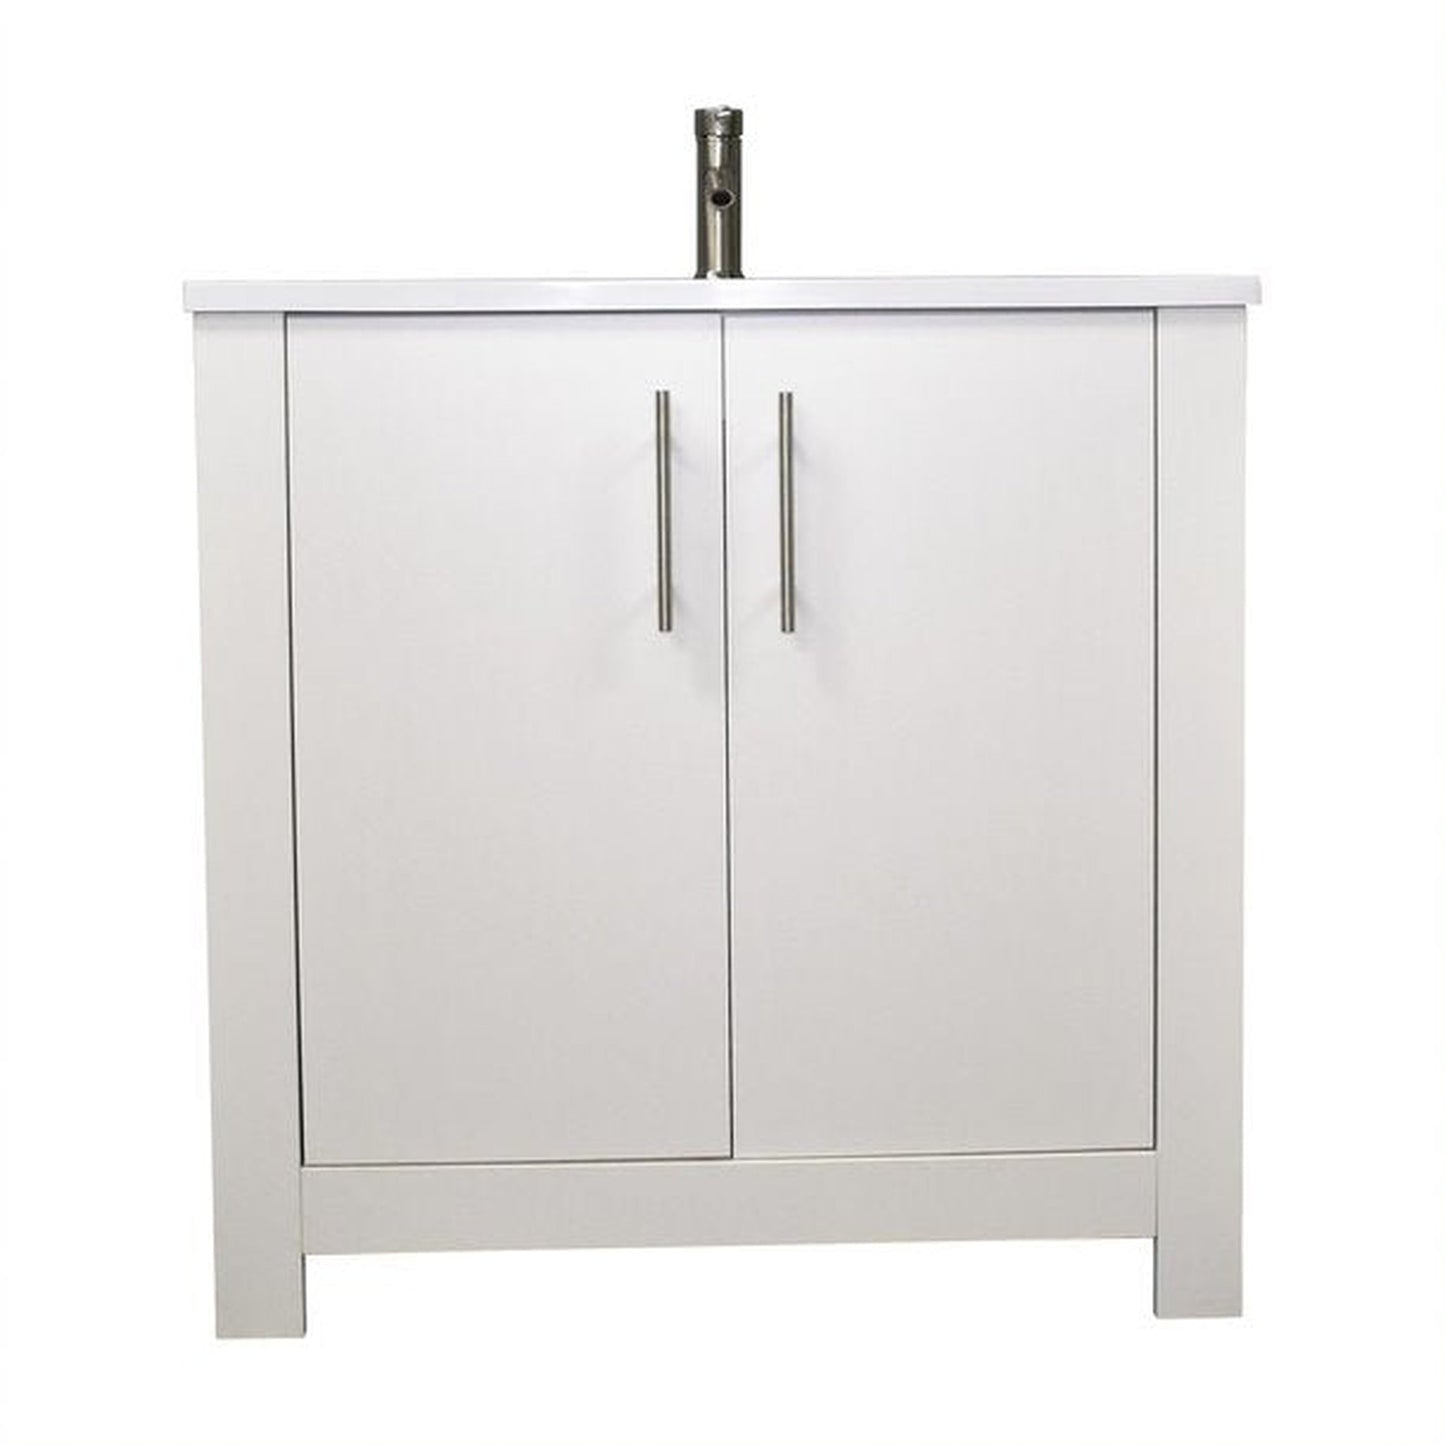 Volpa USA Austin 36" x 20" White Modern Freestanding Bathroom Vanity With Acrylic Top, Integrated Acrylic Sink And Brushed Nickel Handles